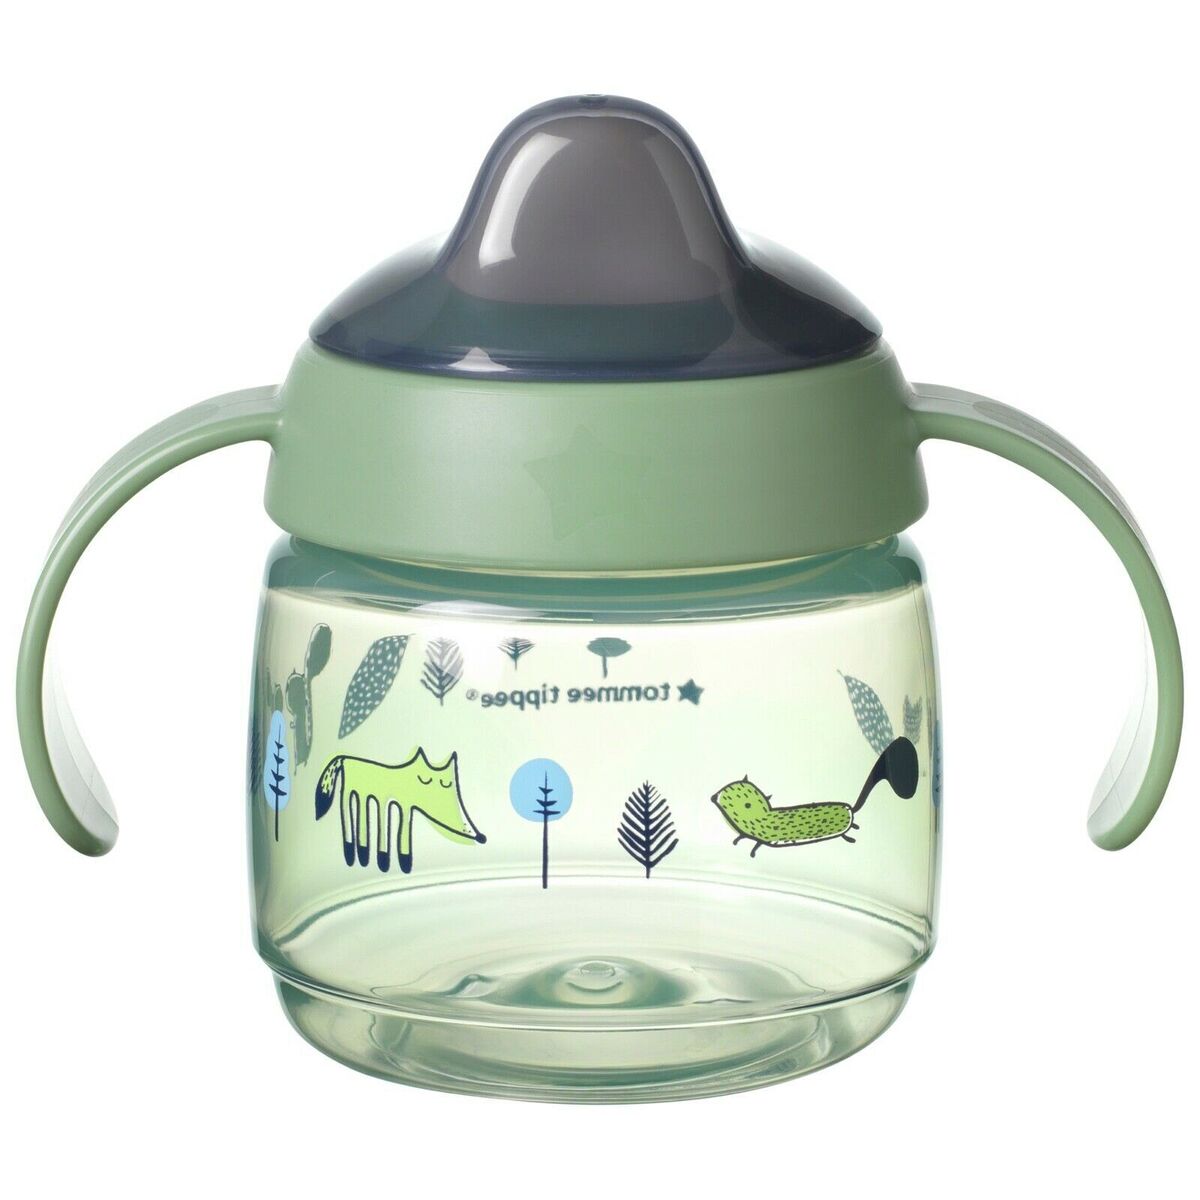 Tommee Tippee Superstar Sippee Weaning Sippy Cup for Babies, Green Color 190ml